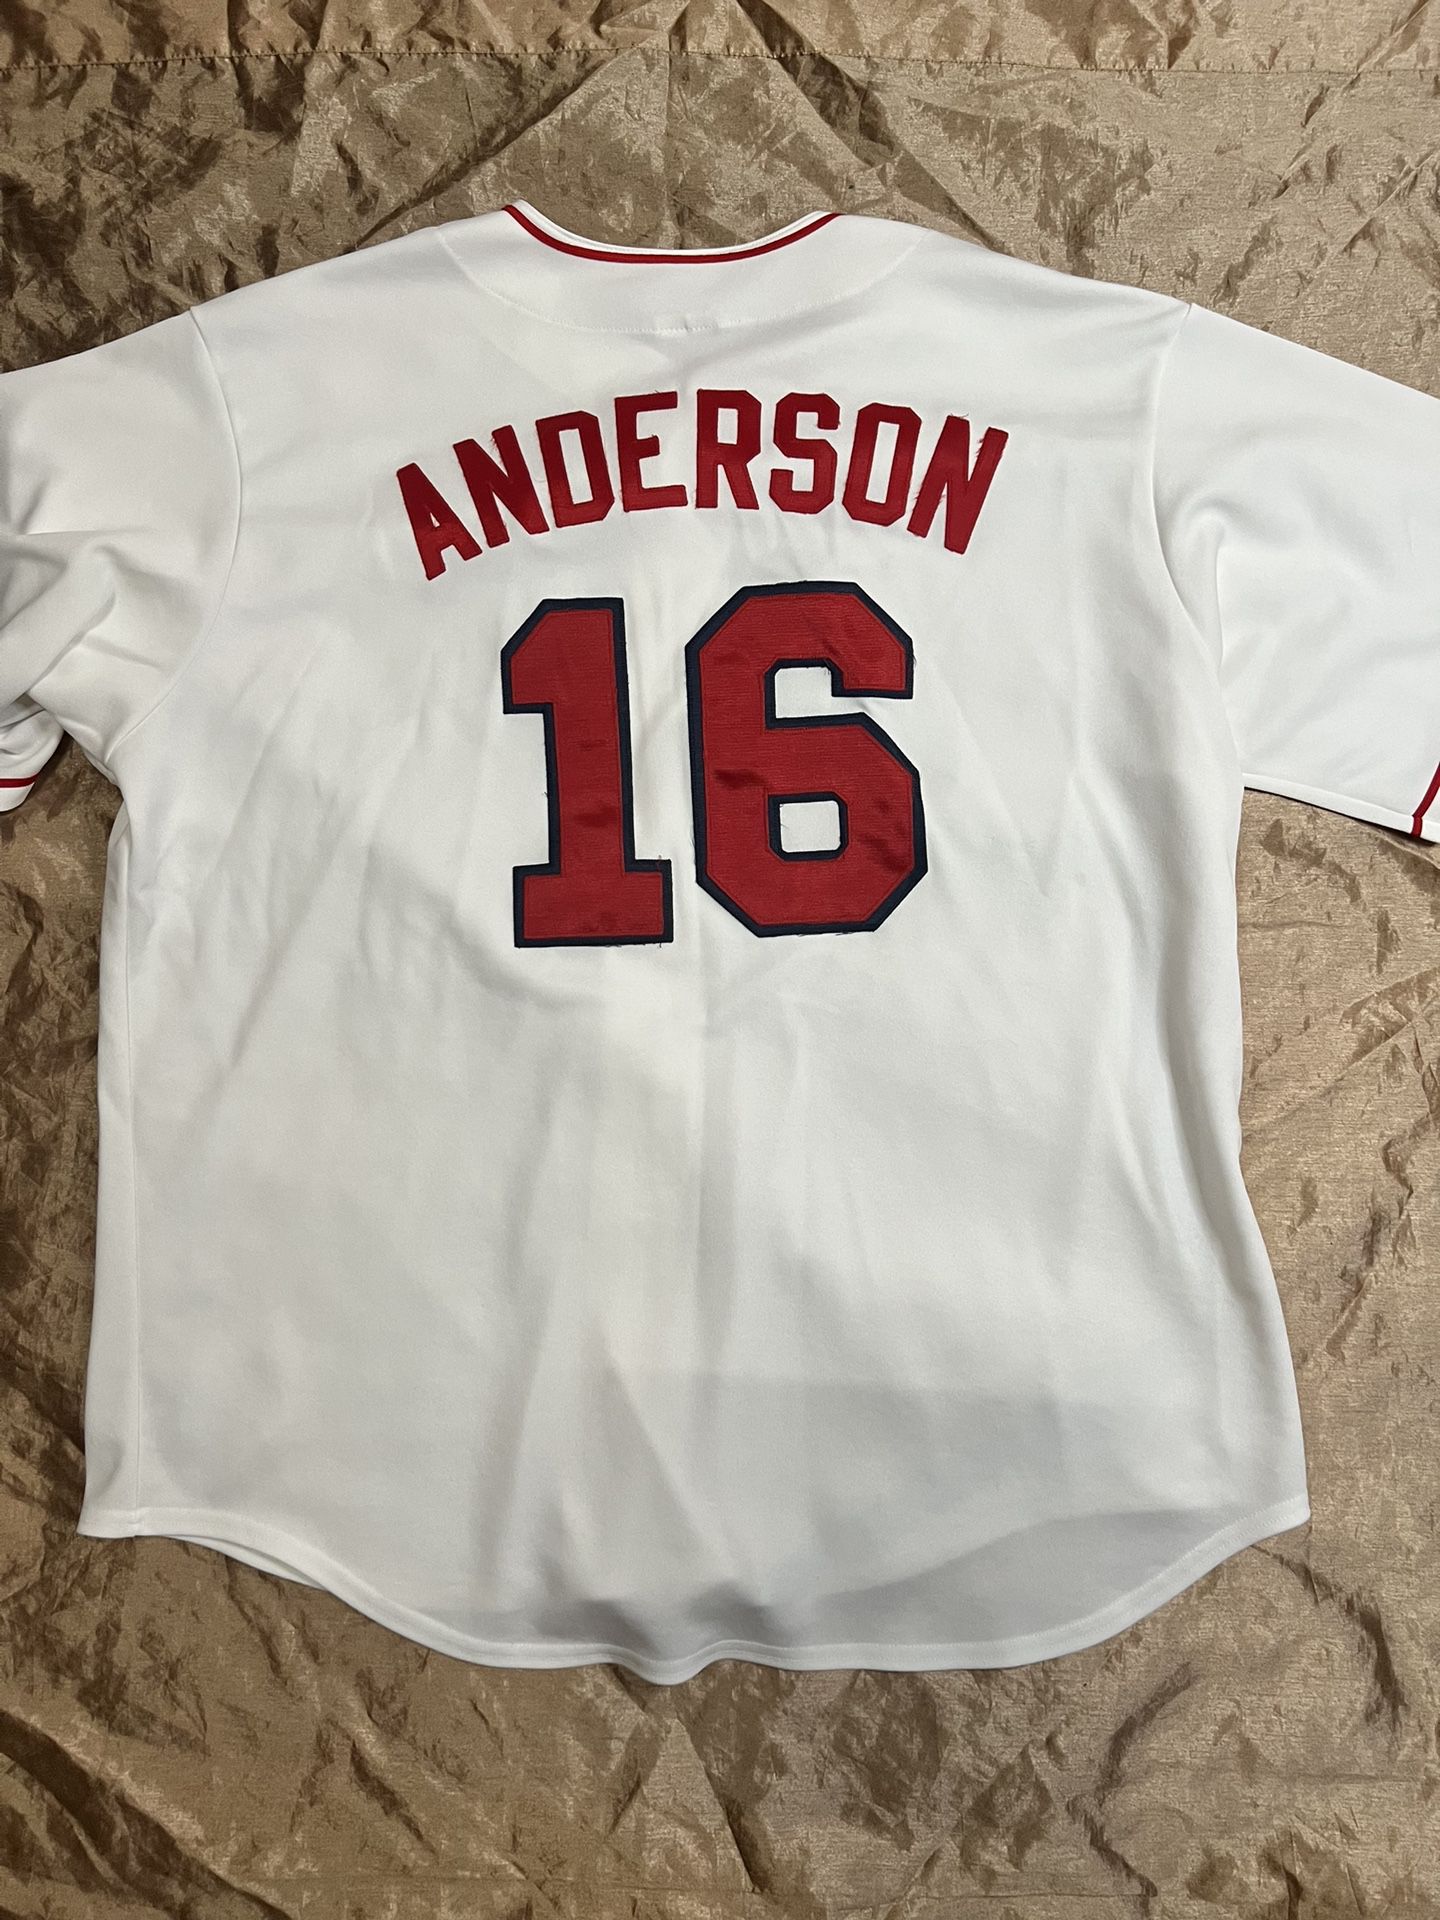 Angels #16 Garret Anderson MLB Mens size 2XL Baseball Jersey Majestic Authentic